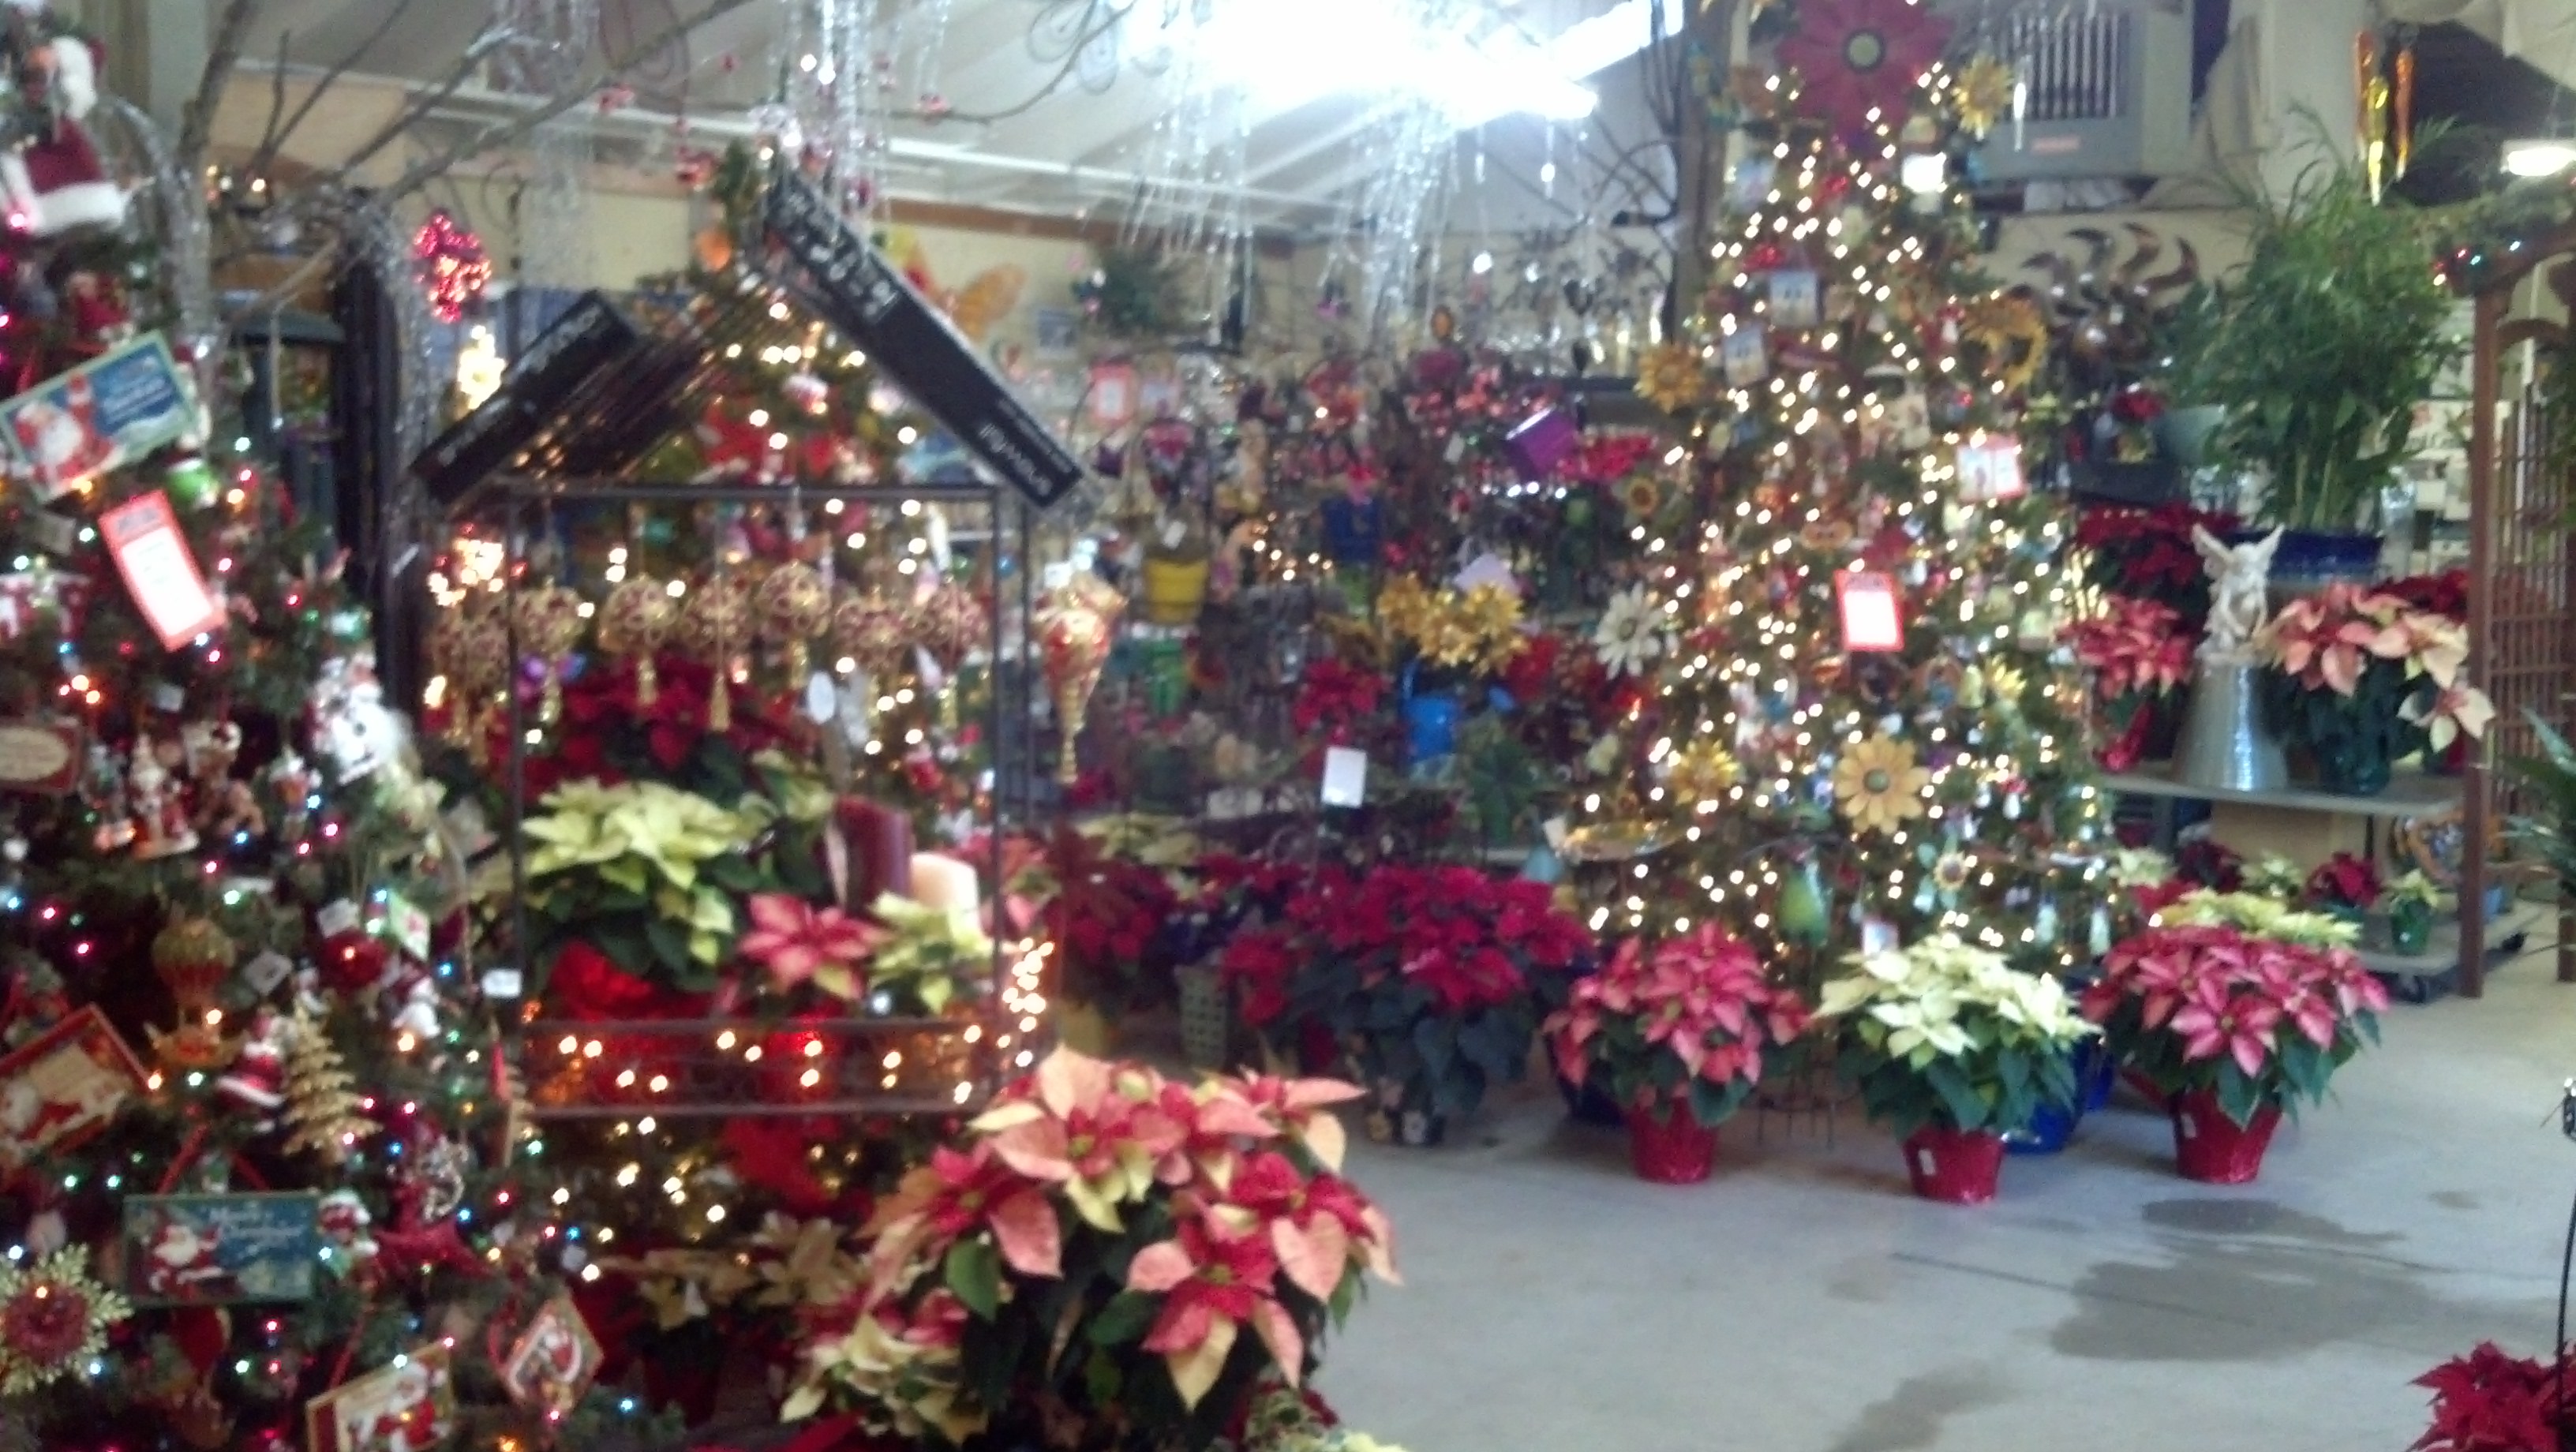 western garden nursery carries a great selection of garden gifts and 